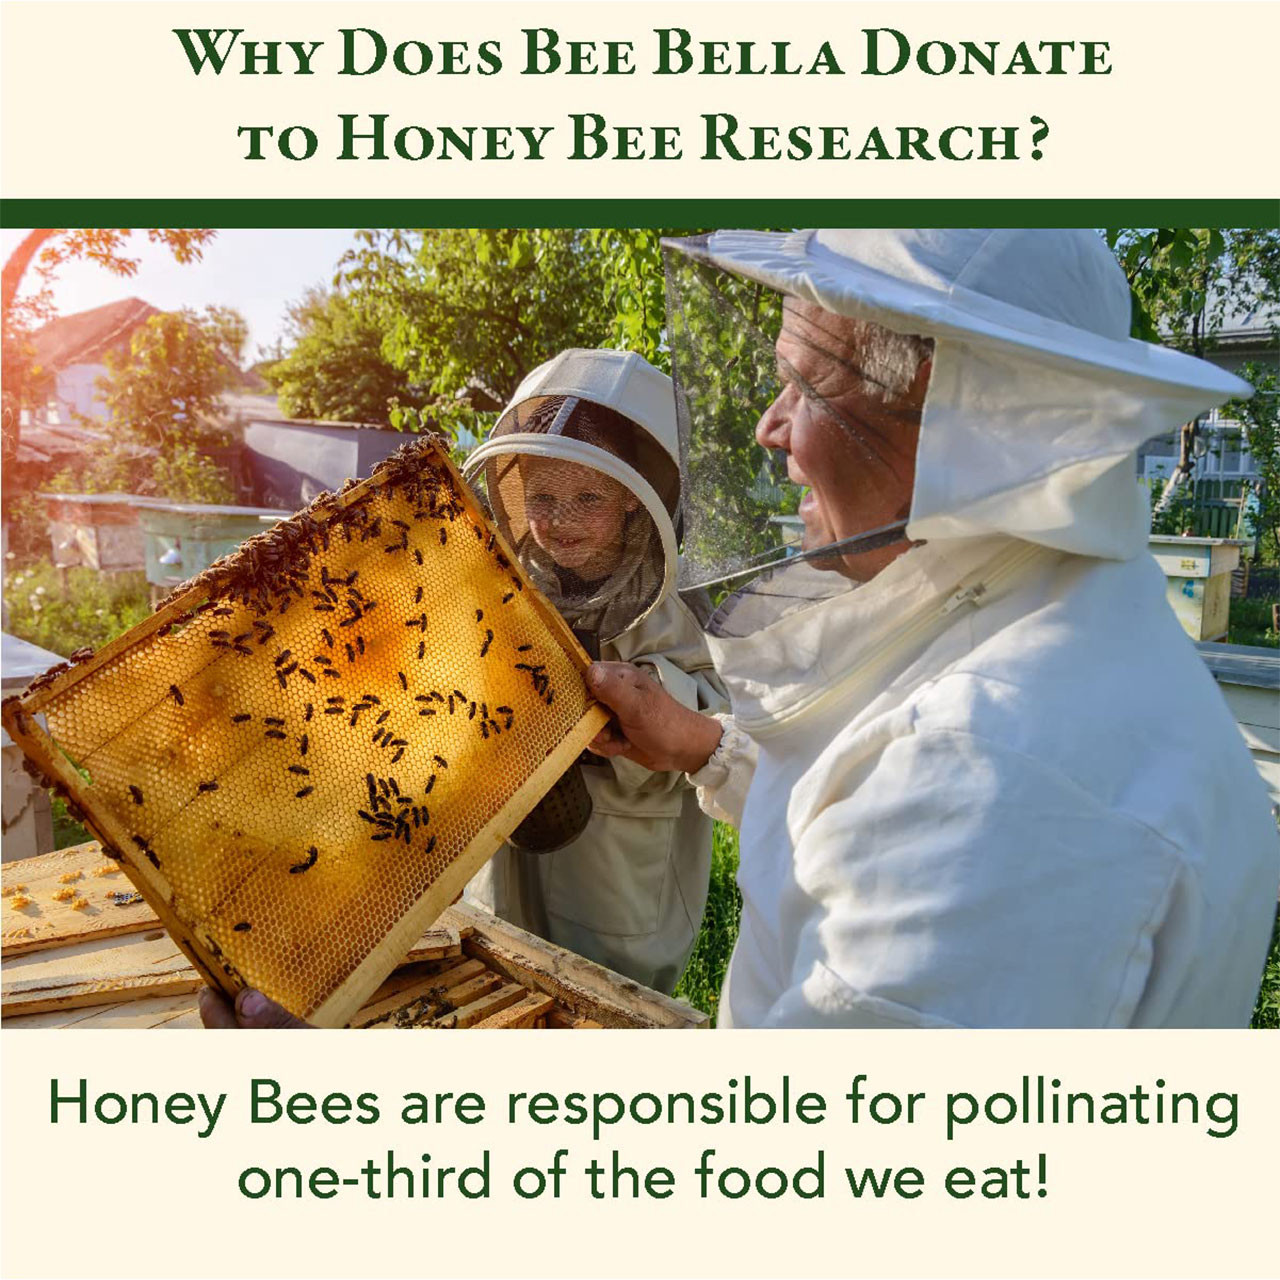 Bee Bella donates to bee research